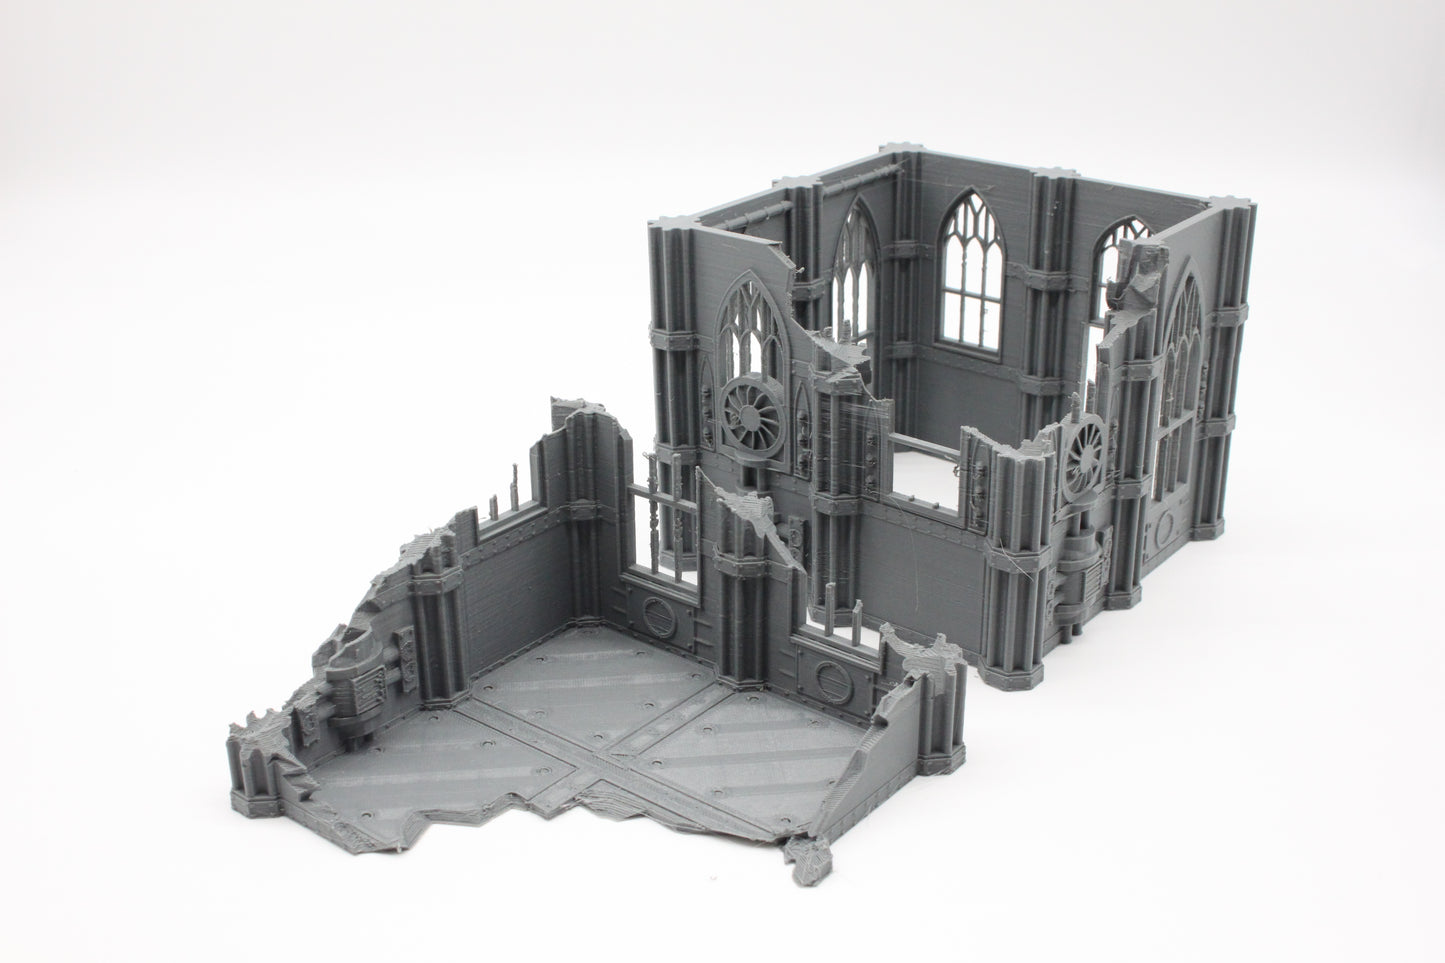 Bundle 3 of Gothic Ruined Buildings